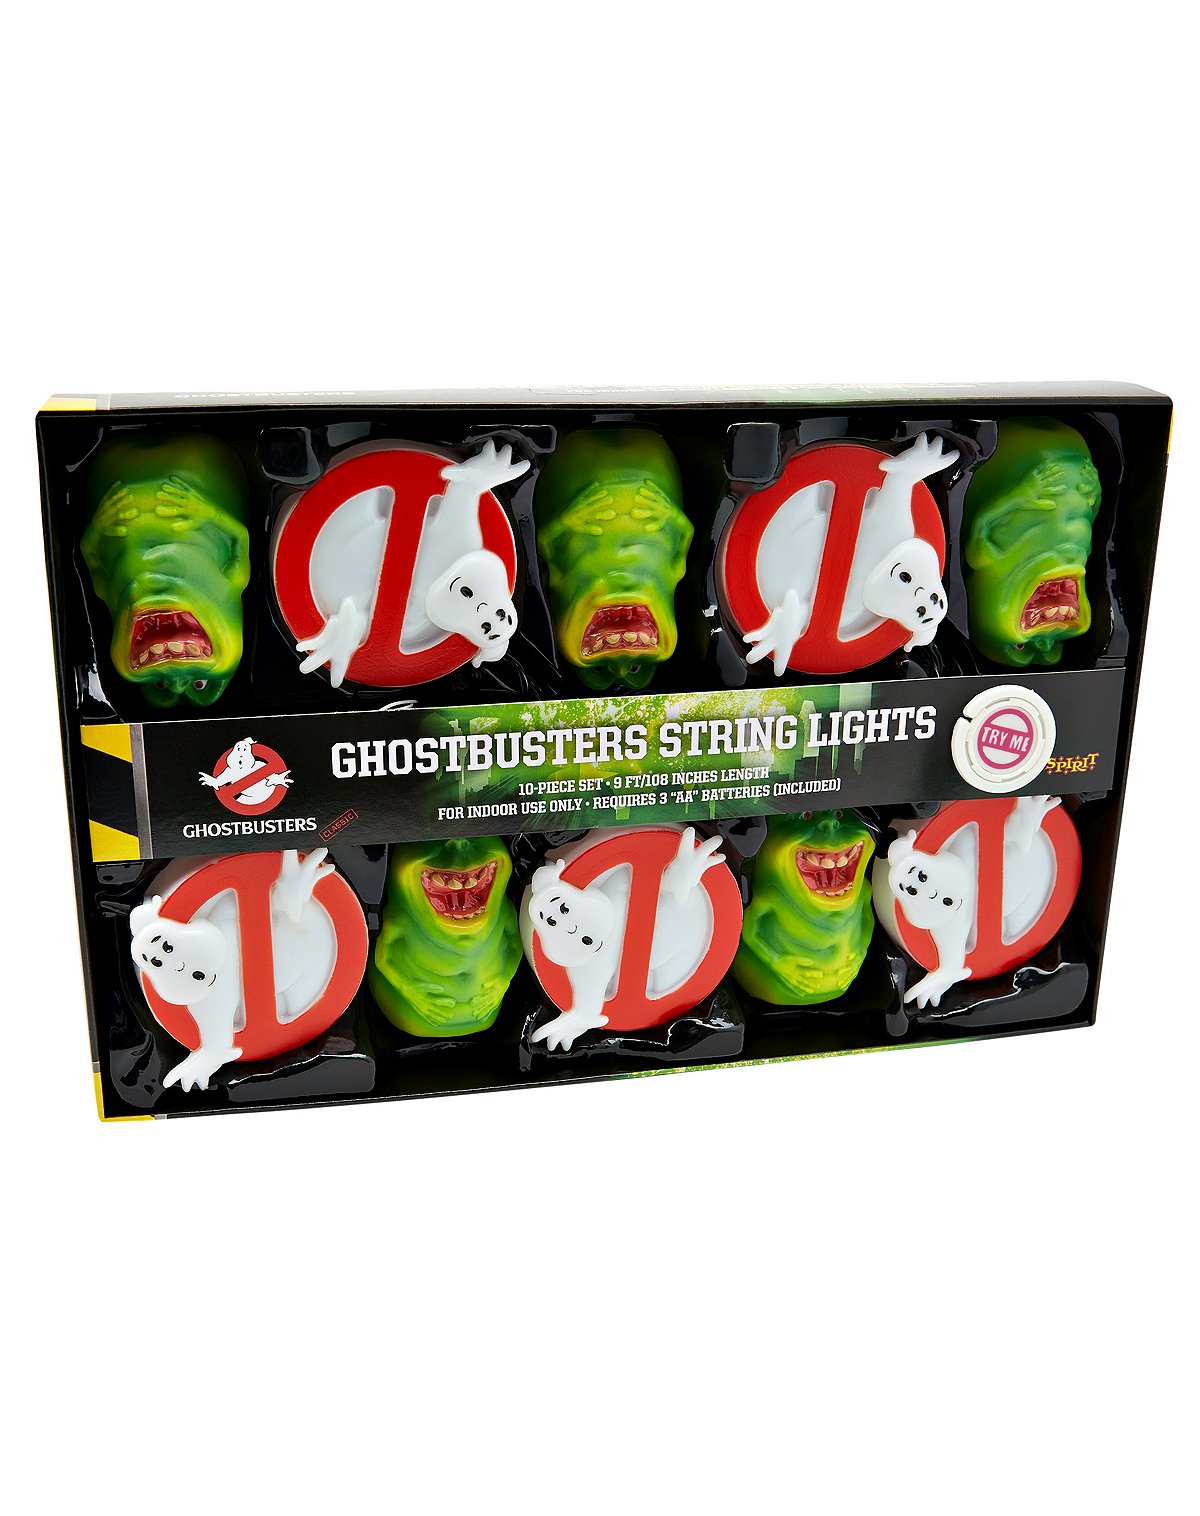 Ghostbusters string lights